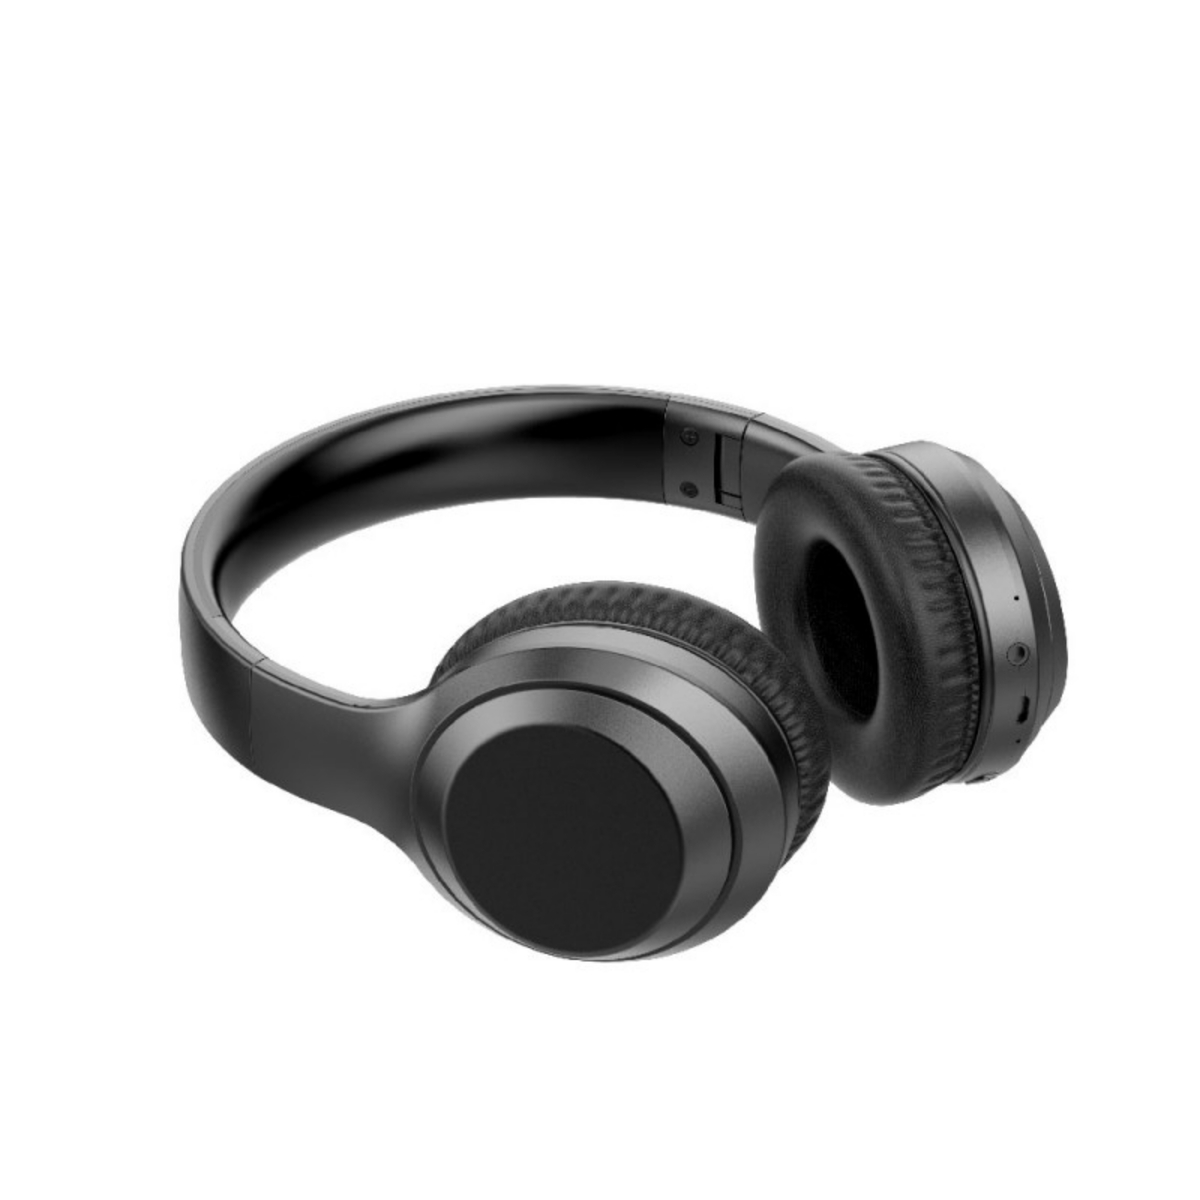 Trands Active Noise Cancellation Wireless Headphone, Black, VT-H745